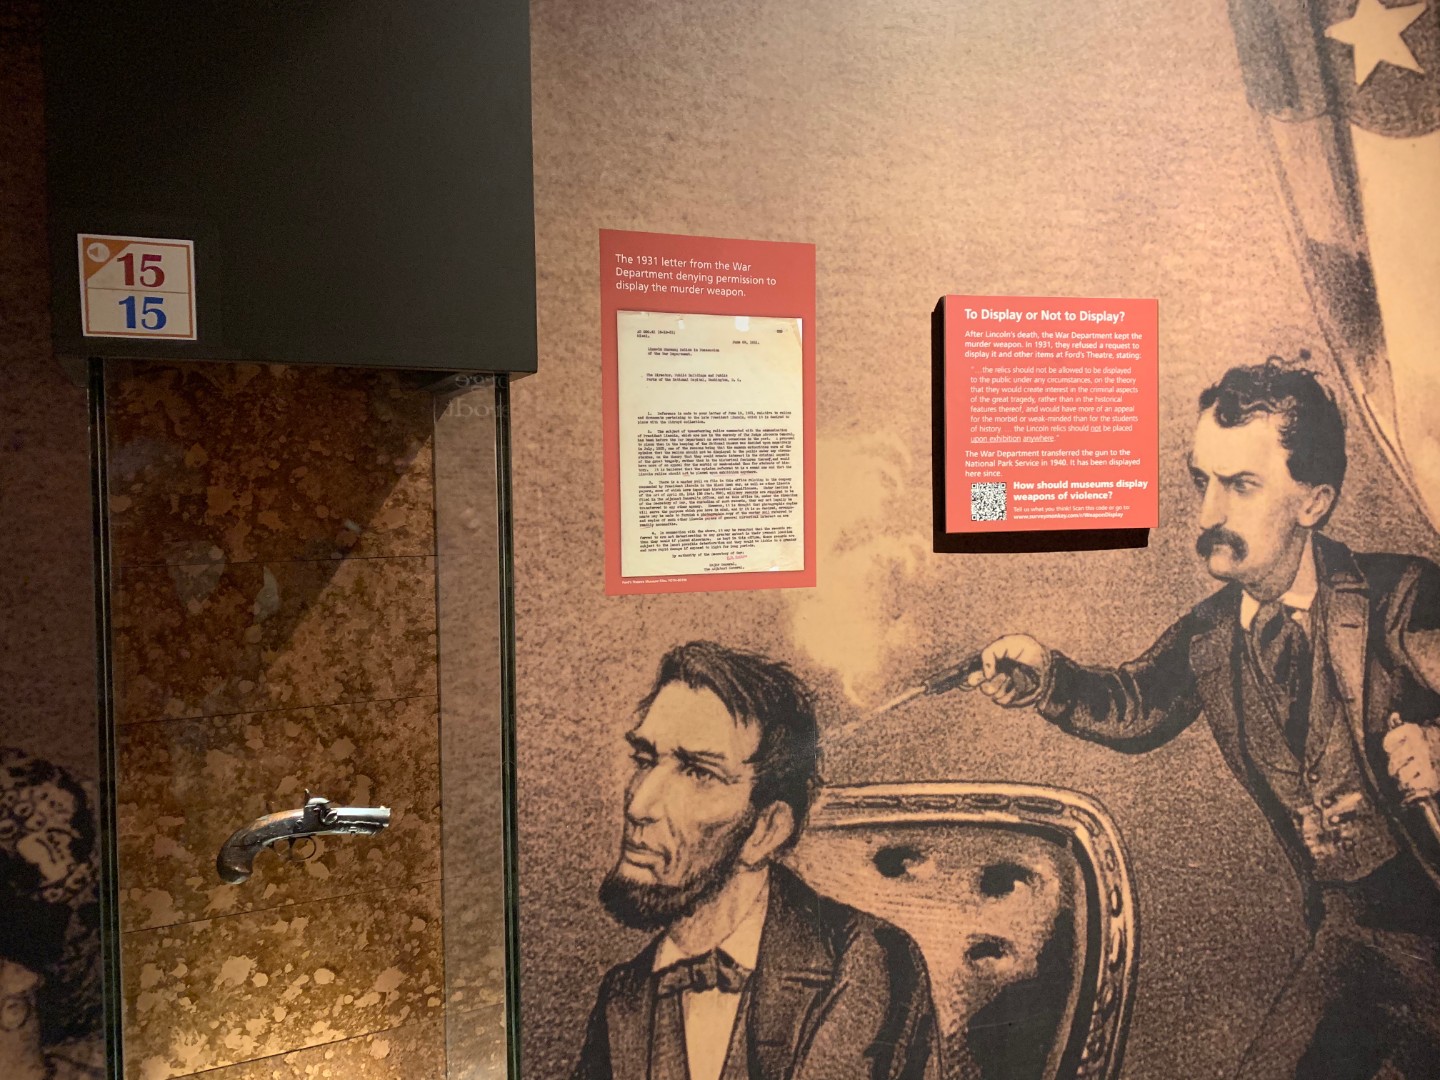 Two museum signs are posted on a wall. One is square sign with text. The other is a rectangular sign with text and an image of a typed letter. Signs are displayed next to a small pistol suspended in a museum display case, and an illustrated mural of assassin John Wilkes Booth shooting President Abraham Lincoln. 